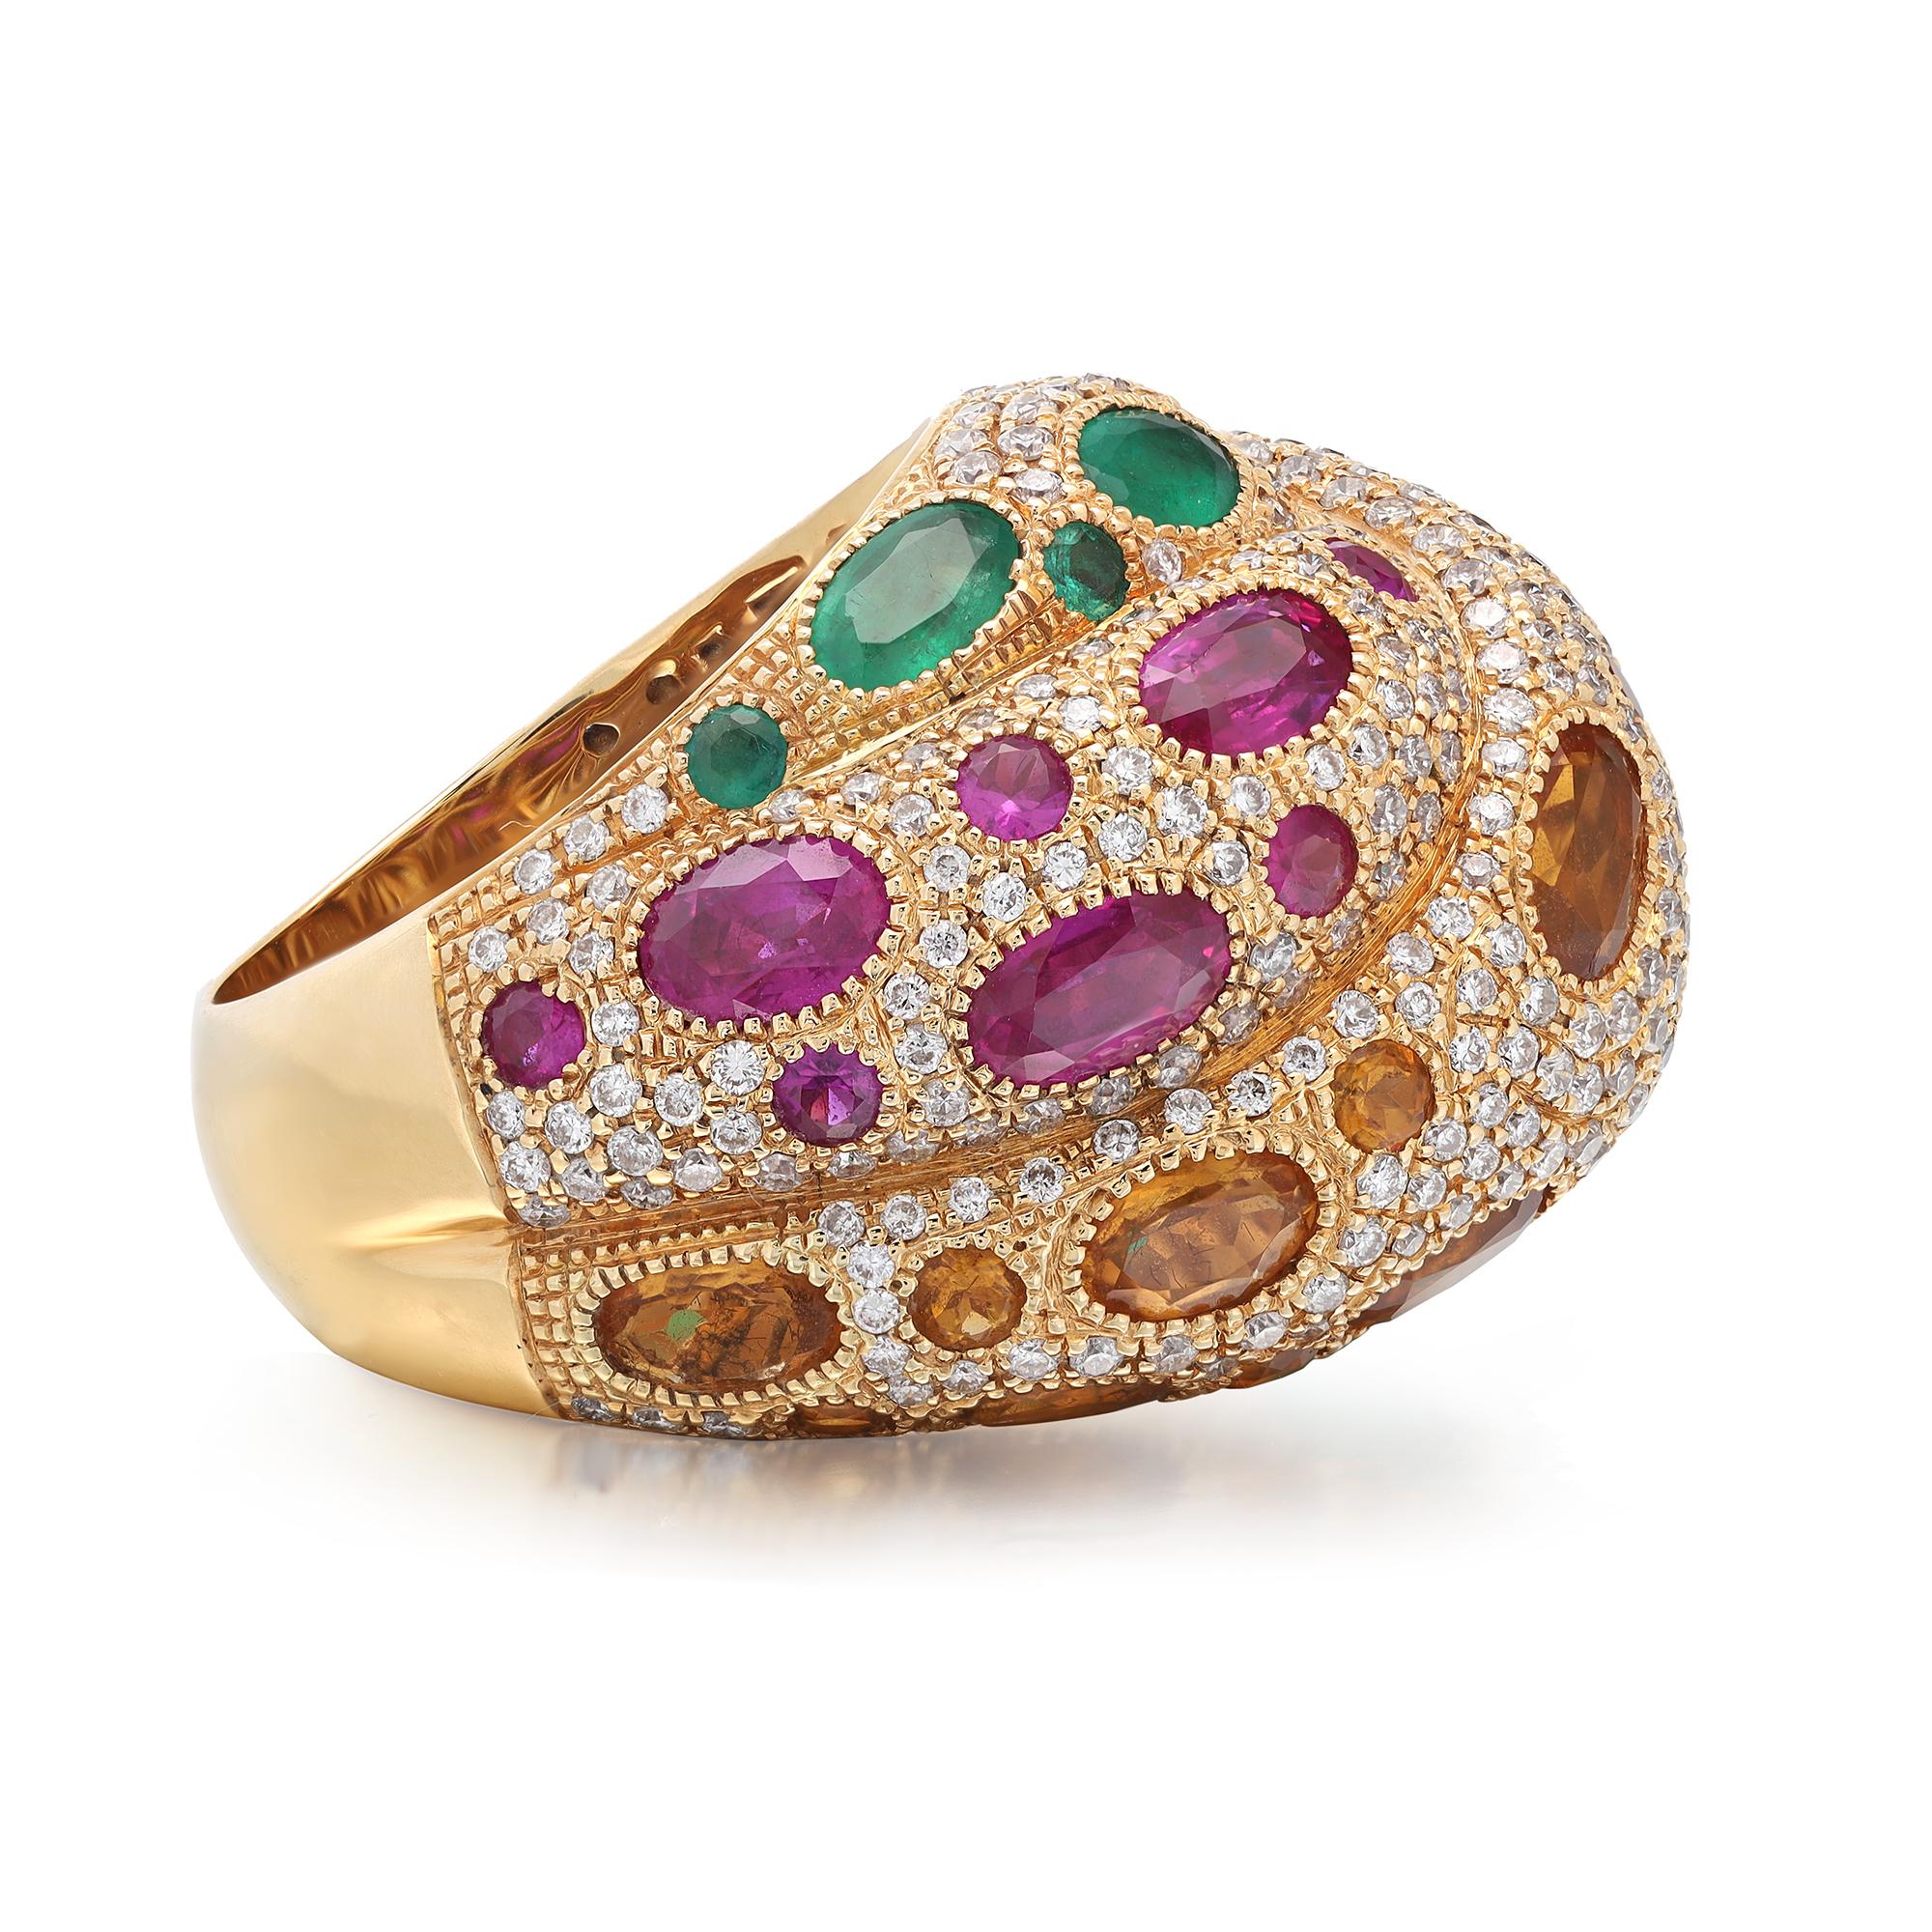 This stunning cocktail ring comes with a flashy statement look. A must have in your jewelry collection. The ring is crafted in 18K yellow gold. Showcases oval cut Ruby, Emerald and Citrine totaling 7.35 carats surrounded with pave set round